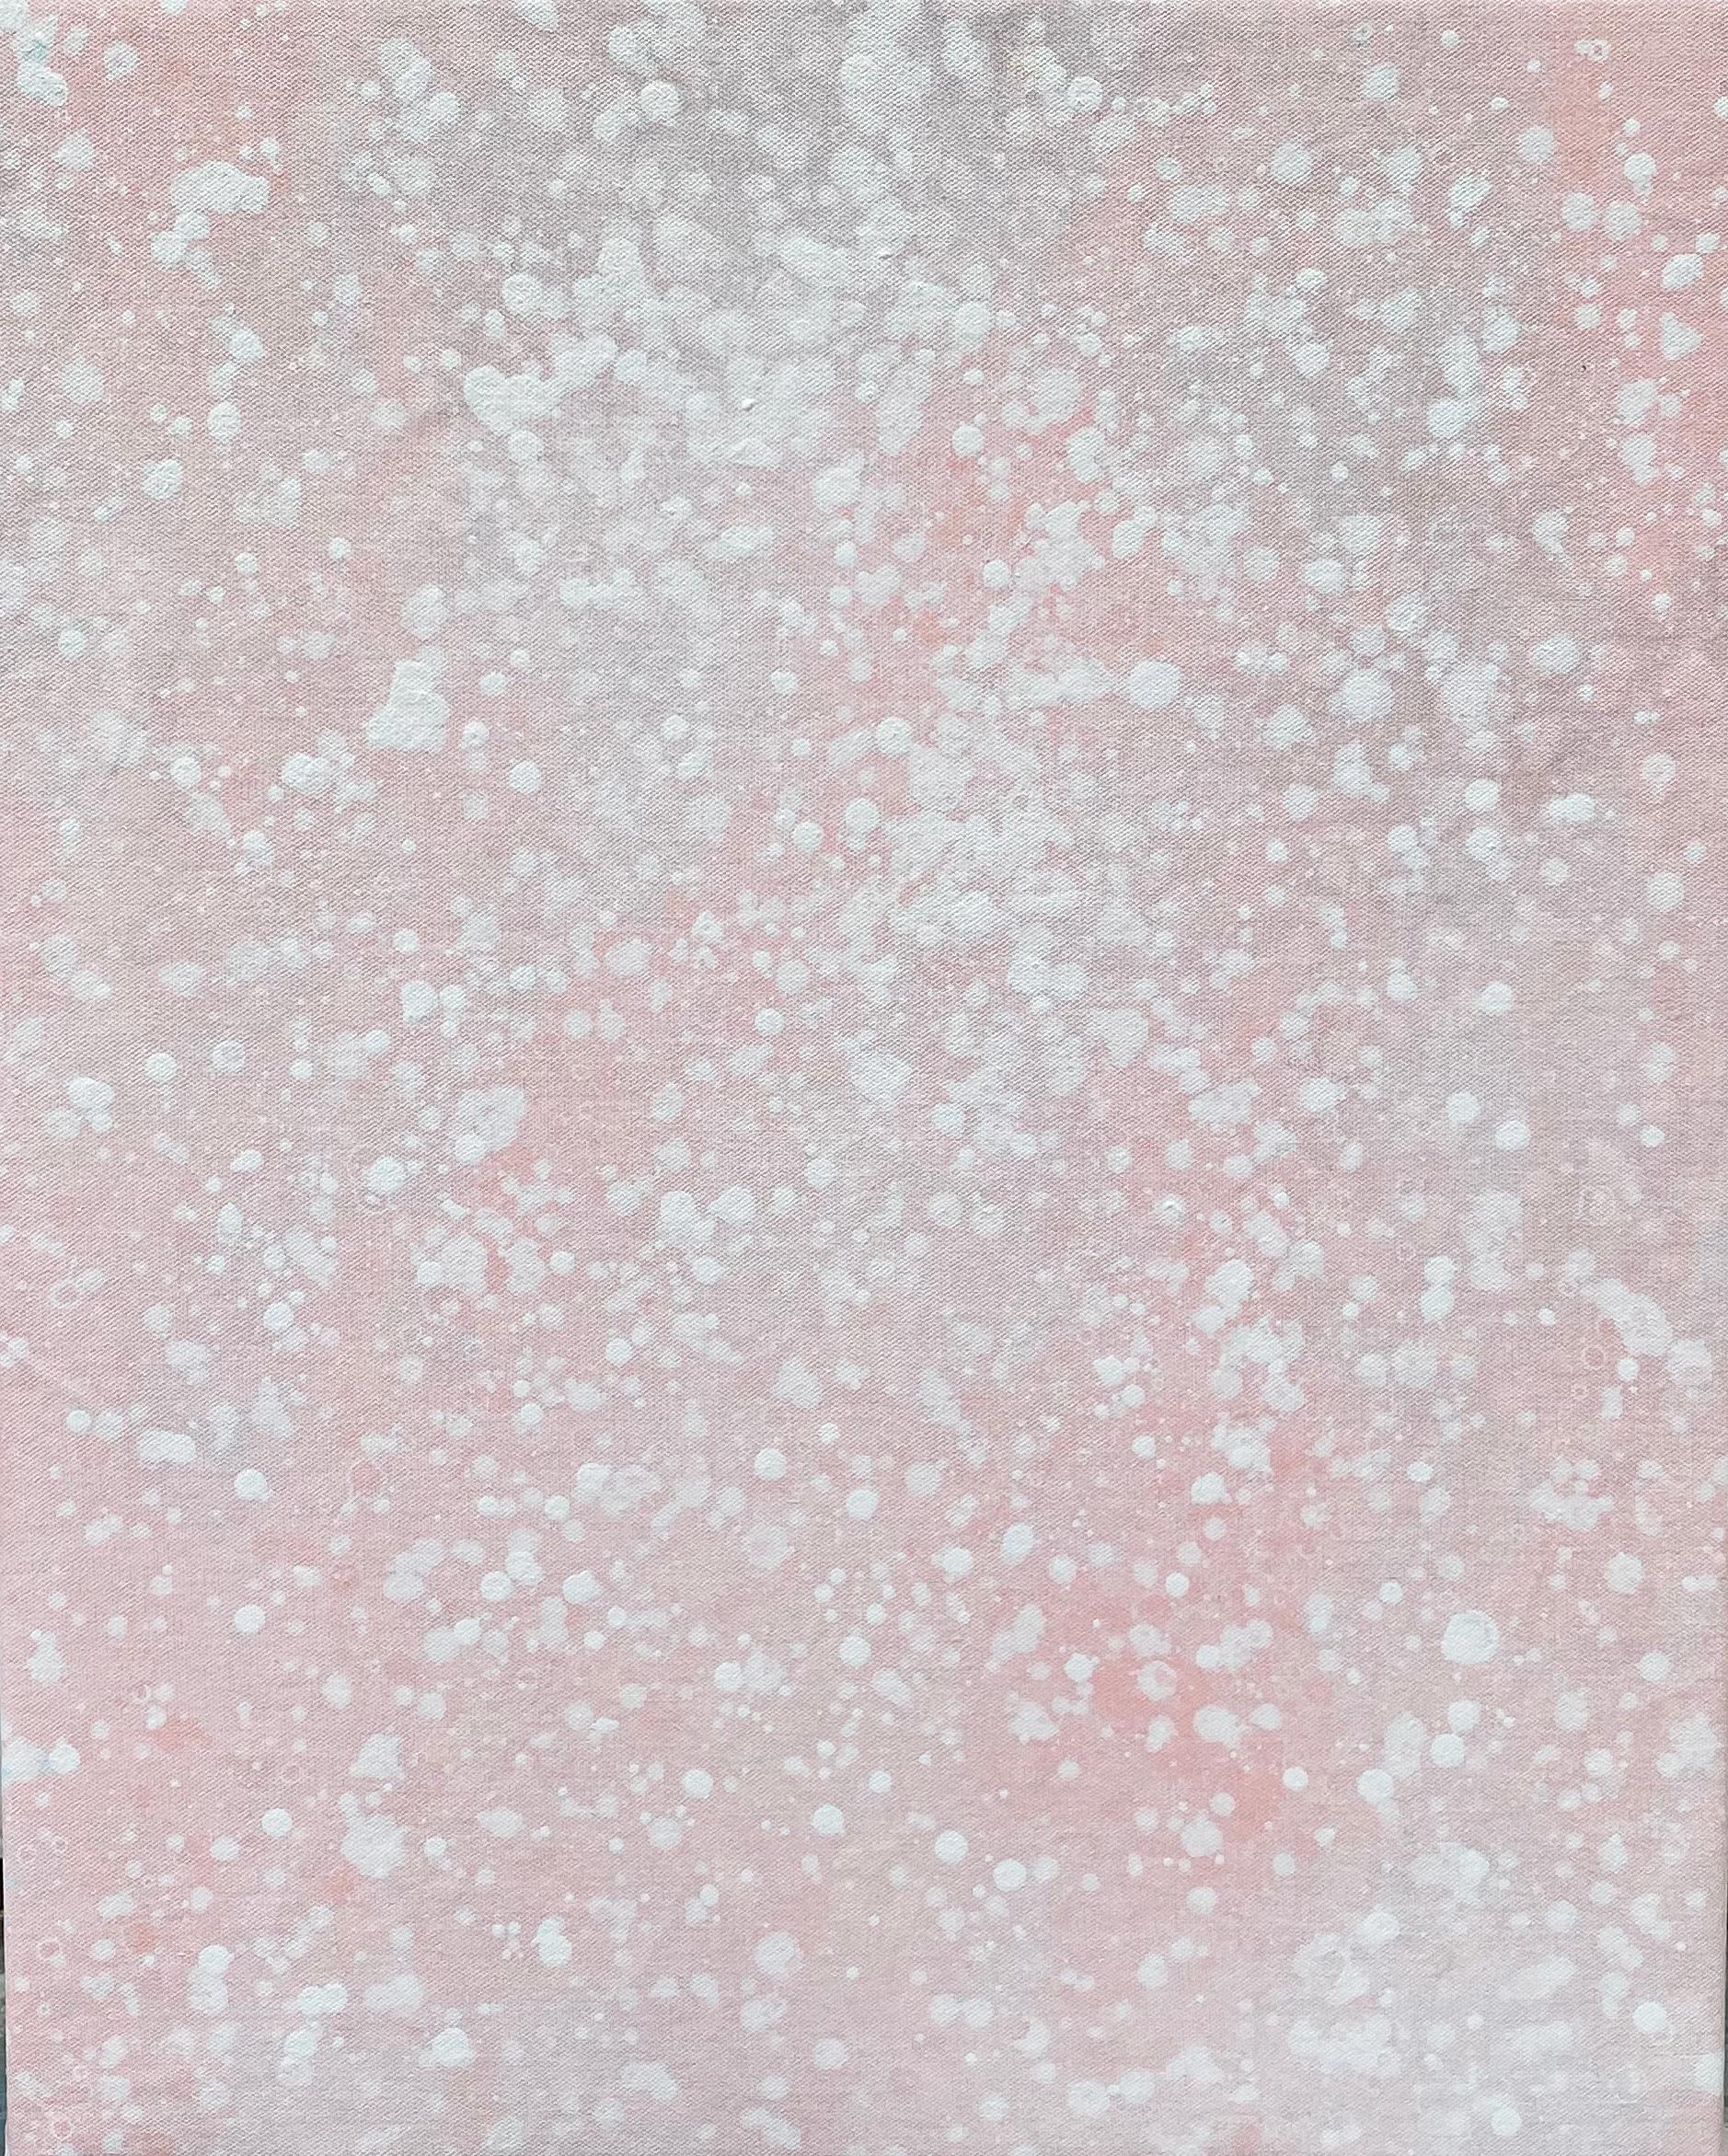 Kathleen Rhee Abstract Painting - Its snowing pastel light pink dot abstract minimal expressionist modern painting